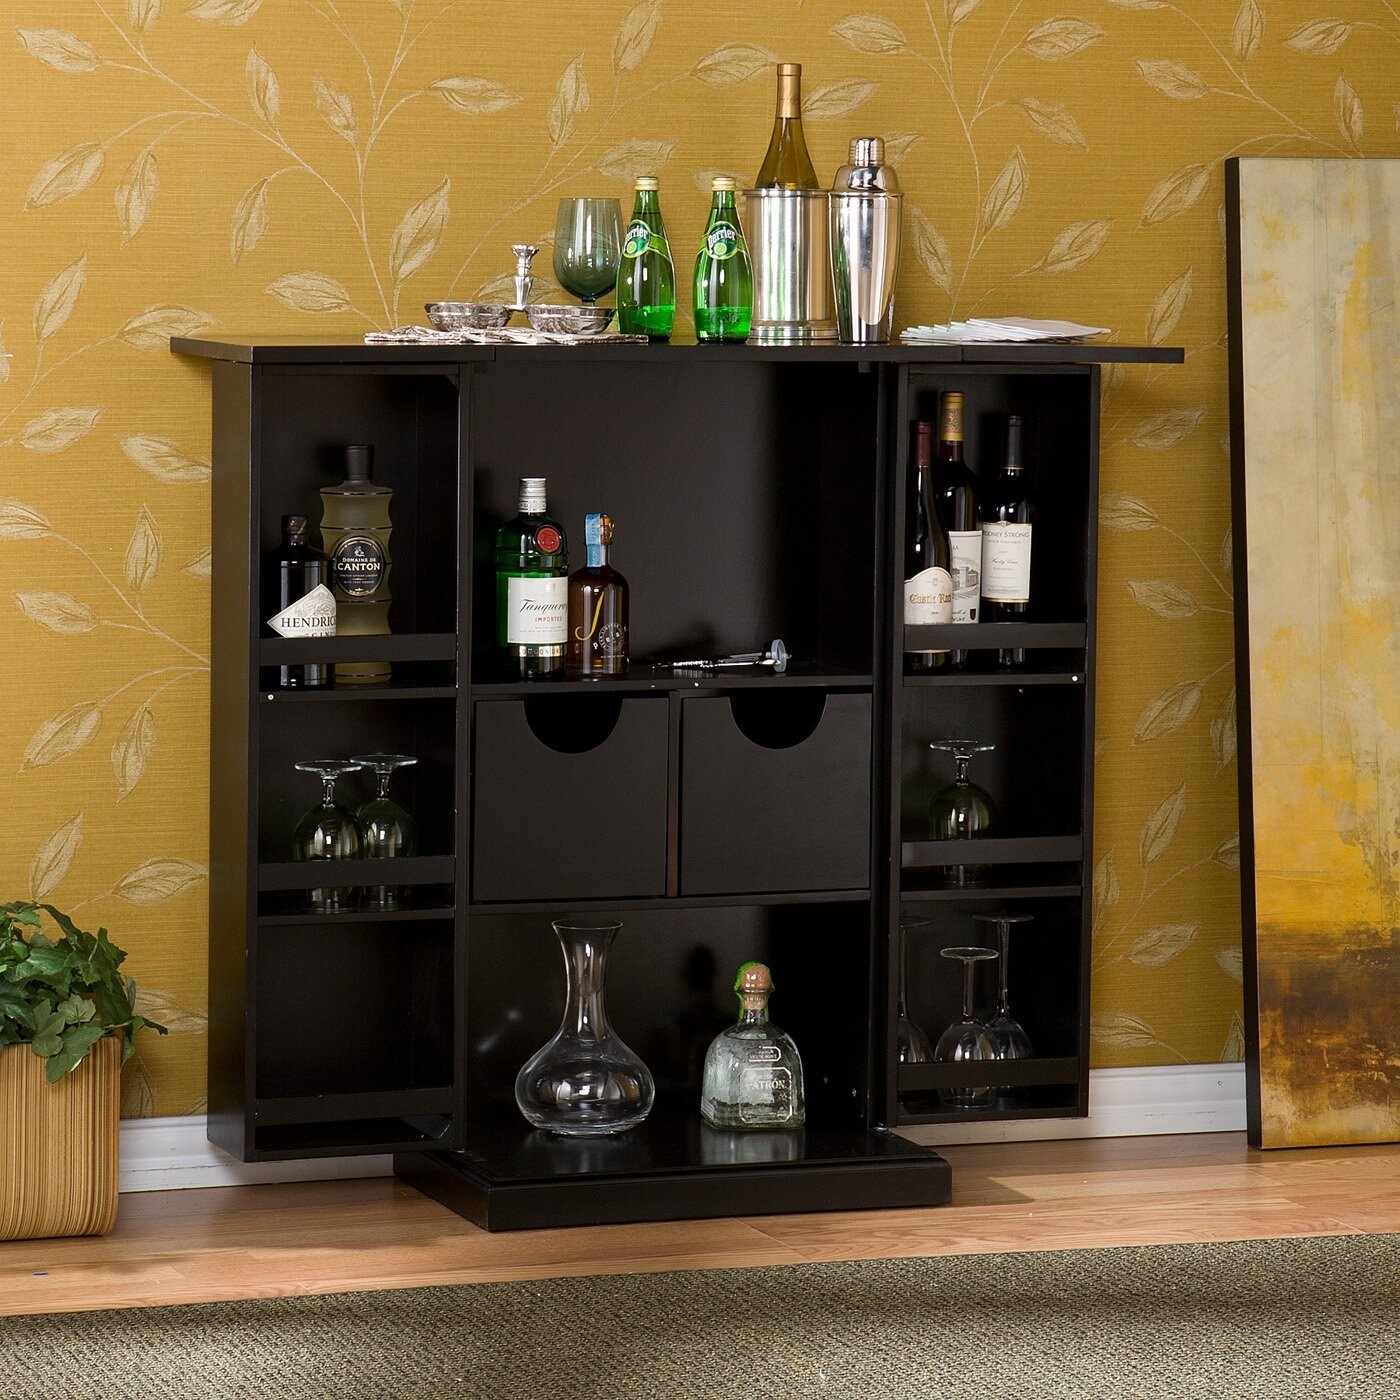 Details about   Home Mini Bar for Liquor Cart Accessories Liqour Small Alcohol Best Classy Drink 